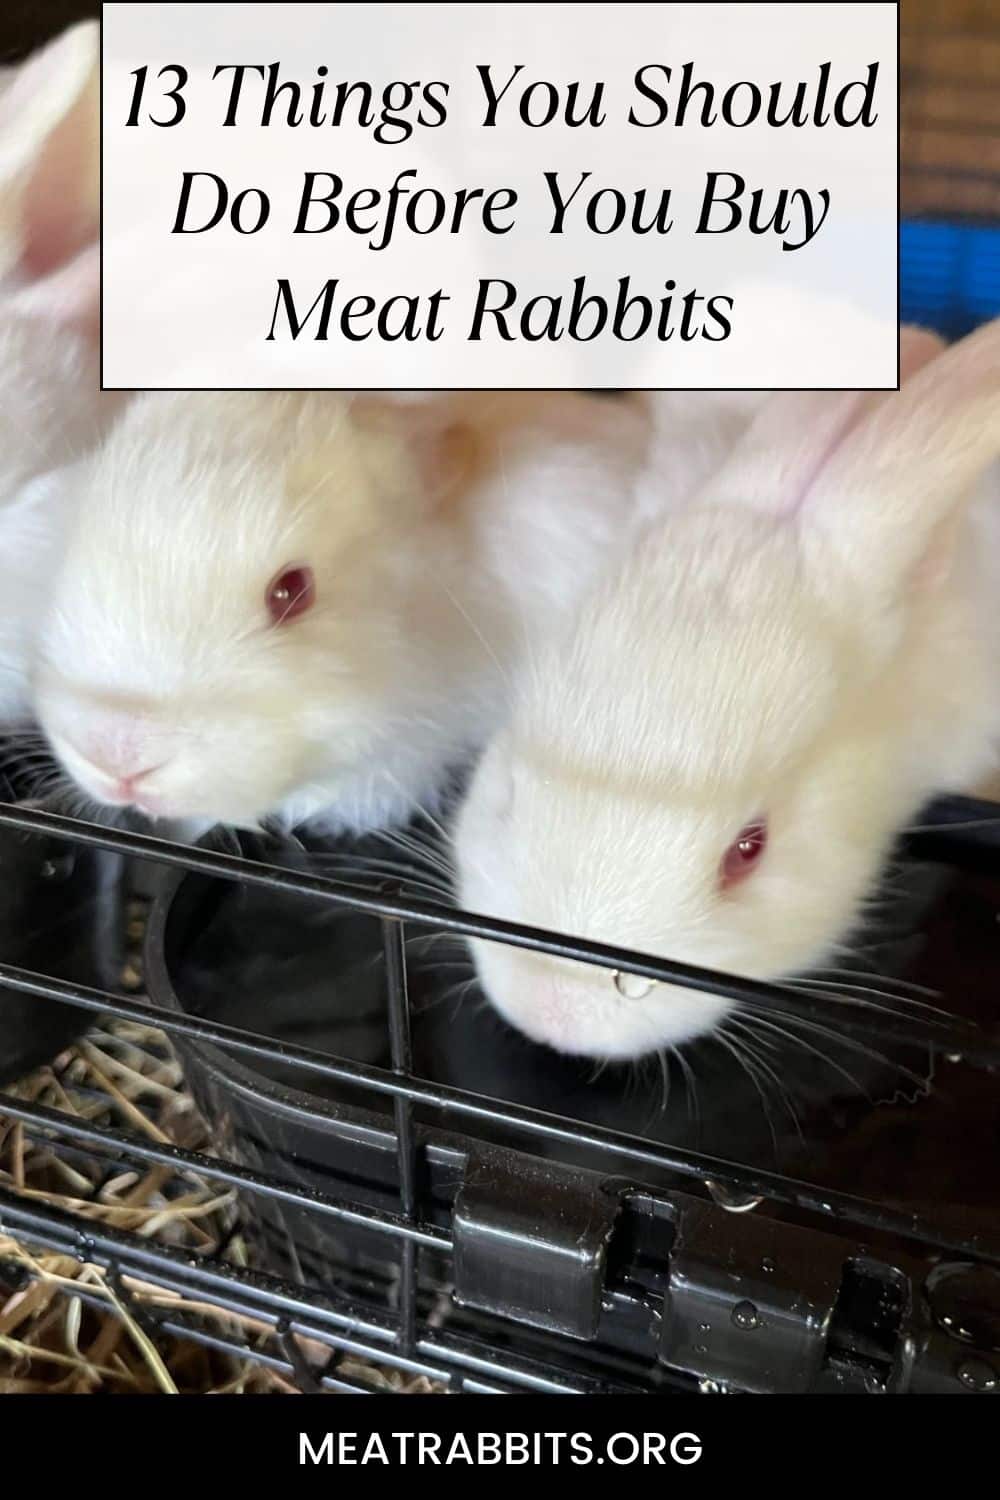 13 Things You Should Do Before You Buy Meat Rabbits pinterest image.